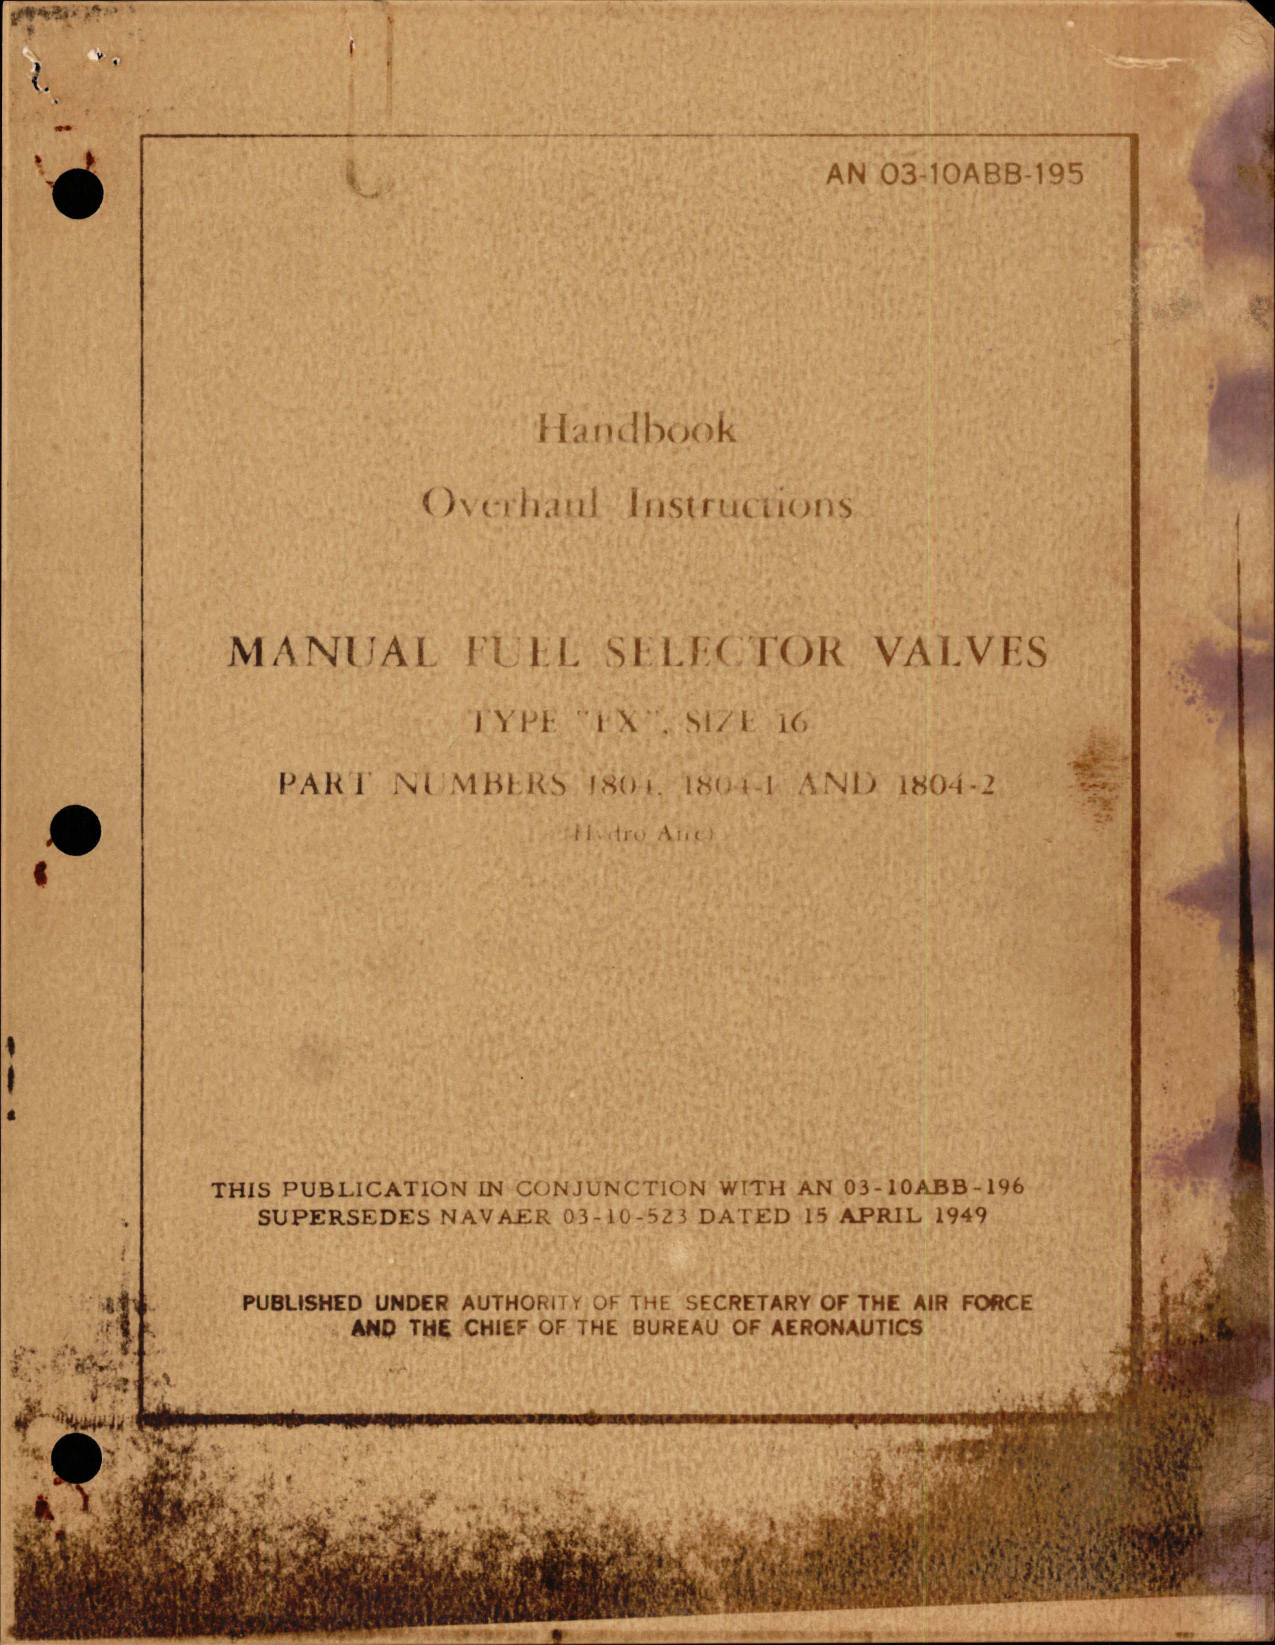 Sample page 1 from AirCorps Library document: Overhaul Instructions for Manual Fuel Selector Valves - Type FX - Size 16 - Parts 1804, 1804-1, and 1804-2 